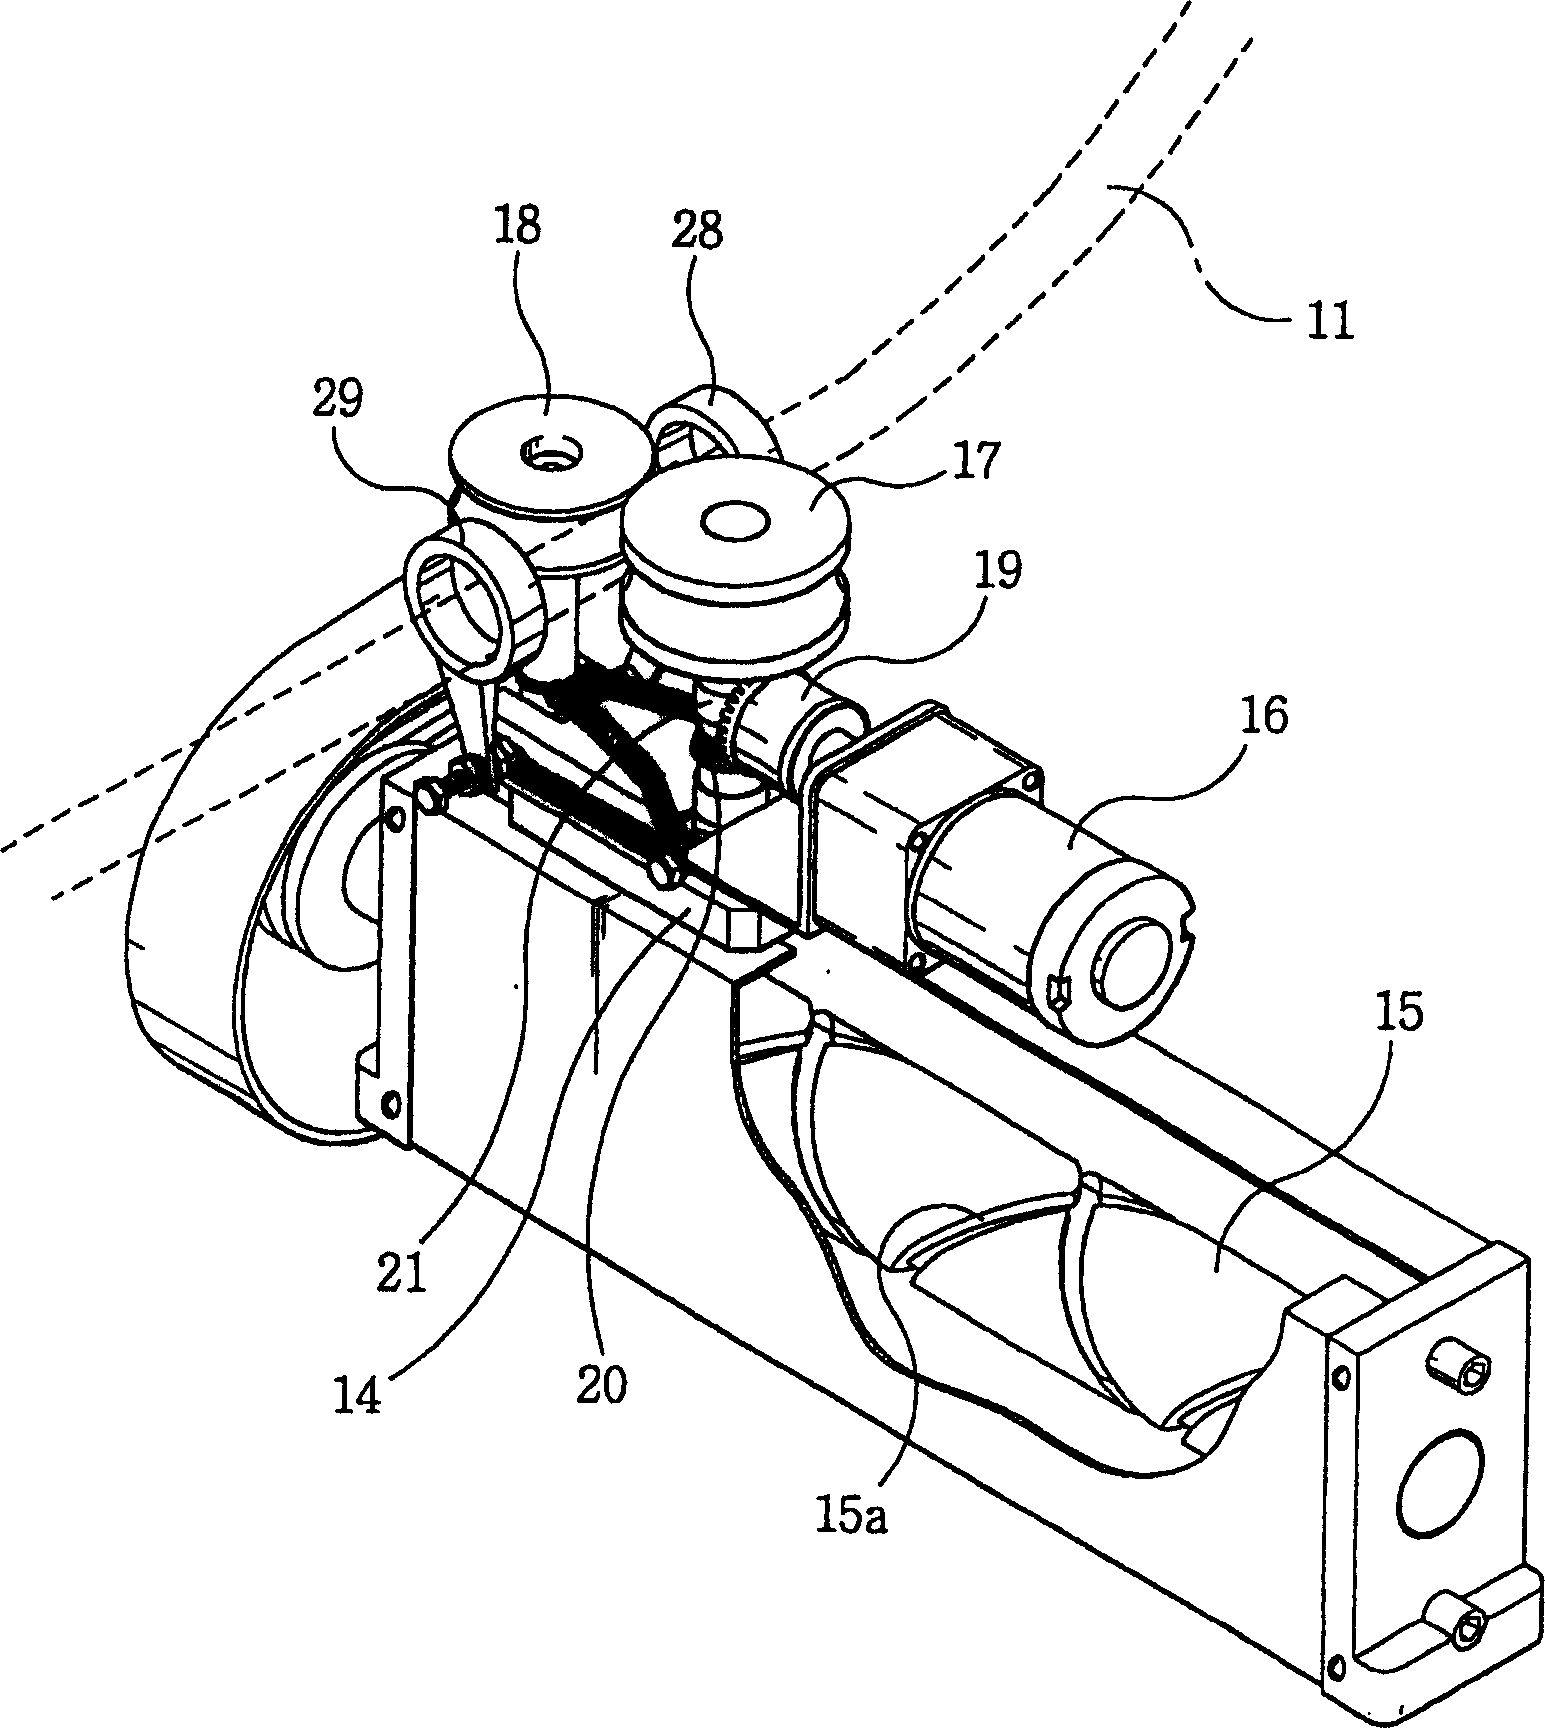 Labor alleviating type pesticide spray system with automatic hose winding and unwinding device